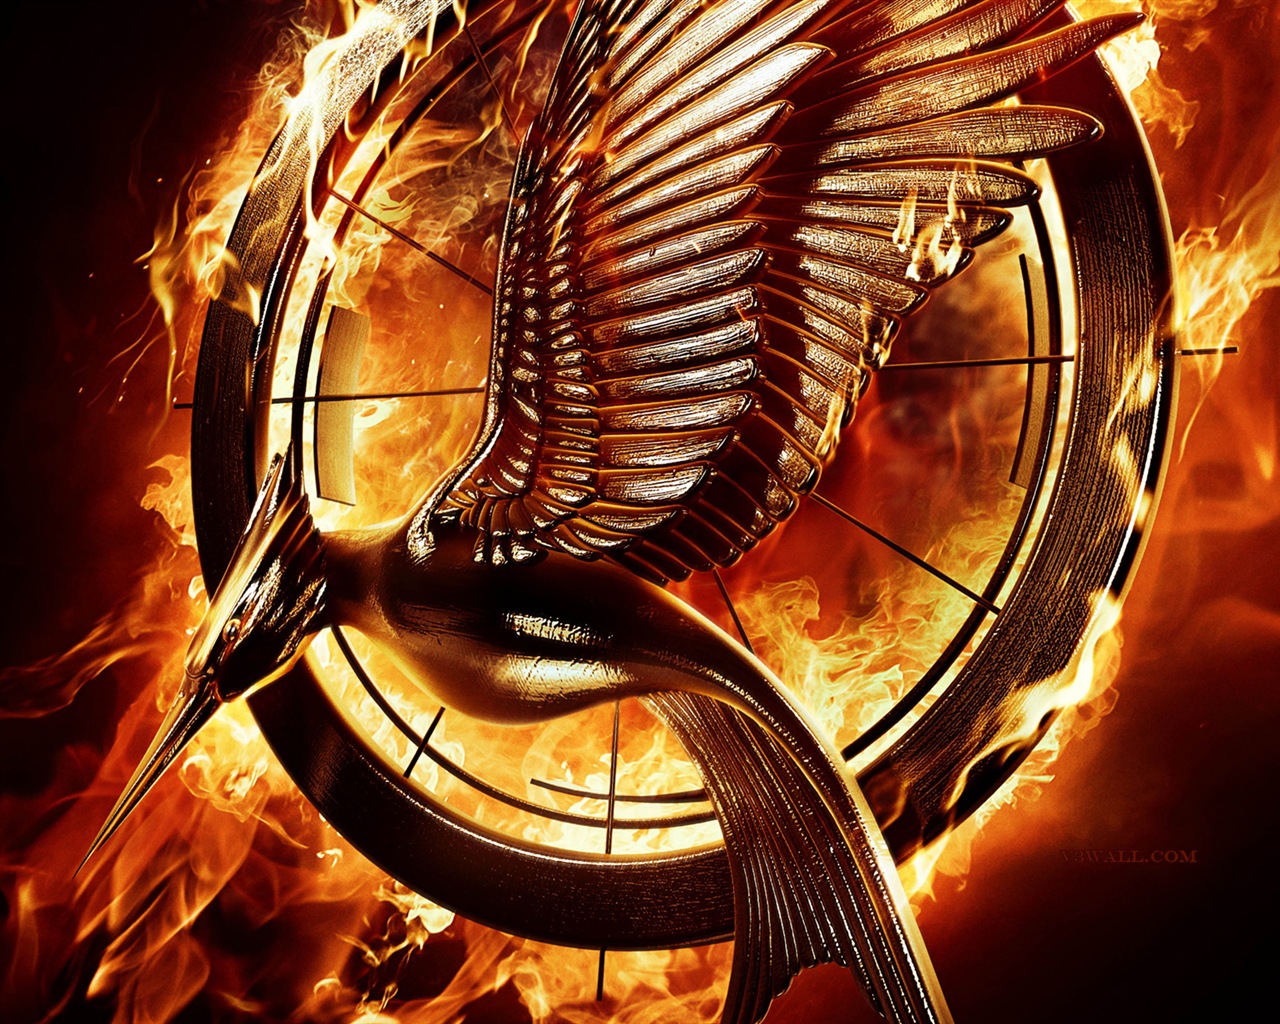 The Hunger Games: Catching Fire wallpapers HD #17 - 1280x1024